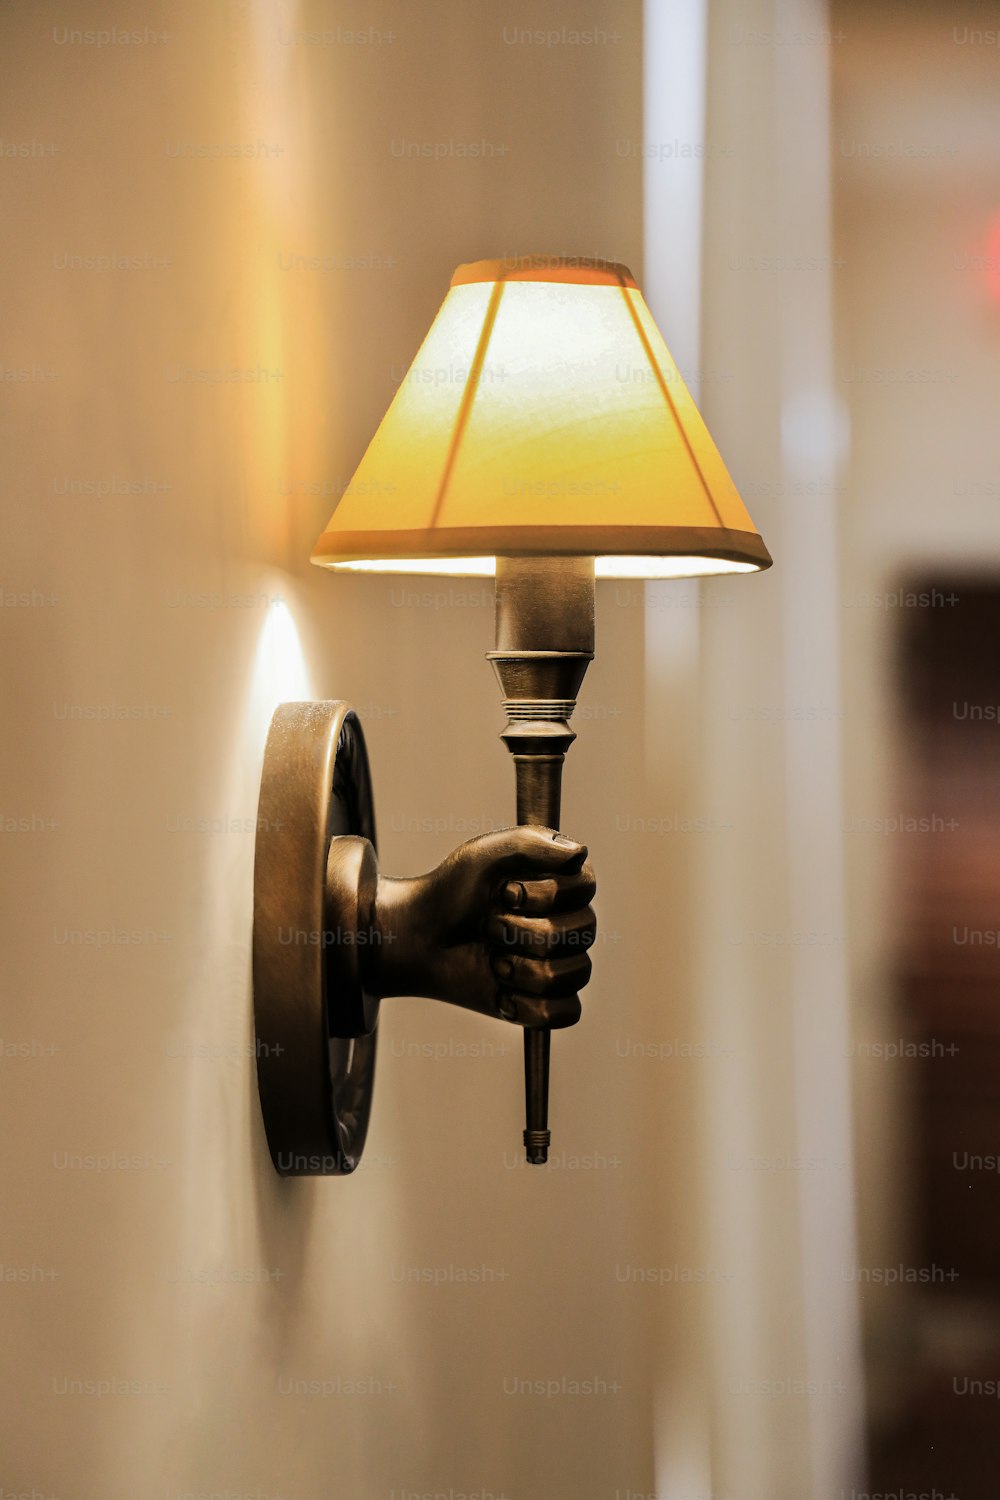 a lamp that is on a wall next to a lamp